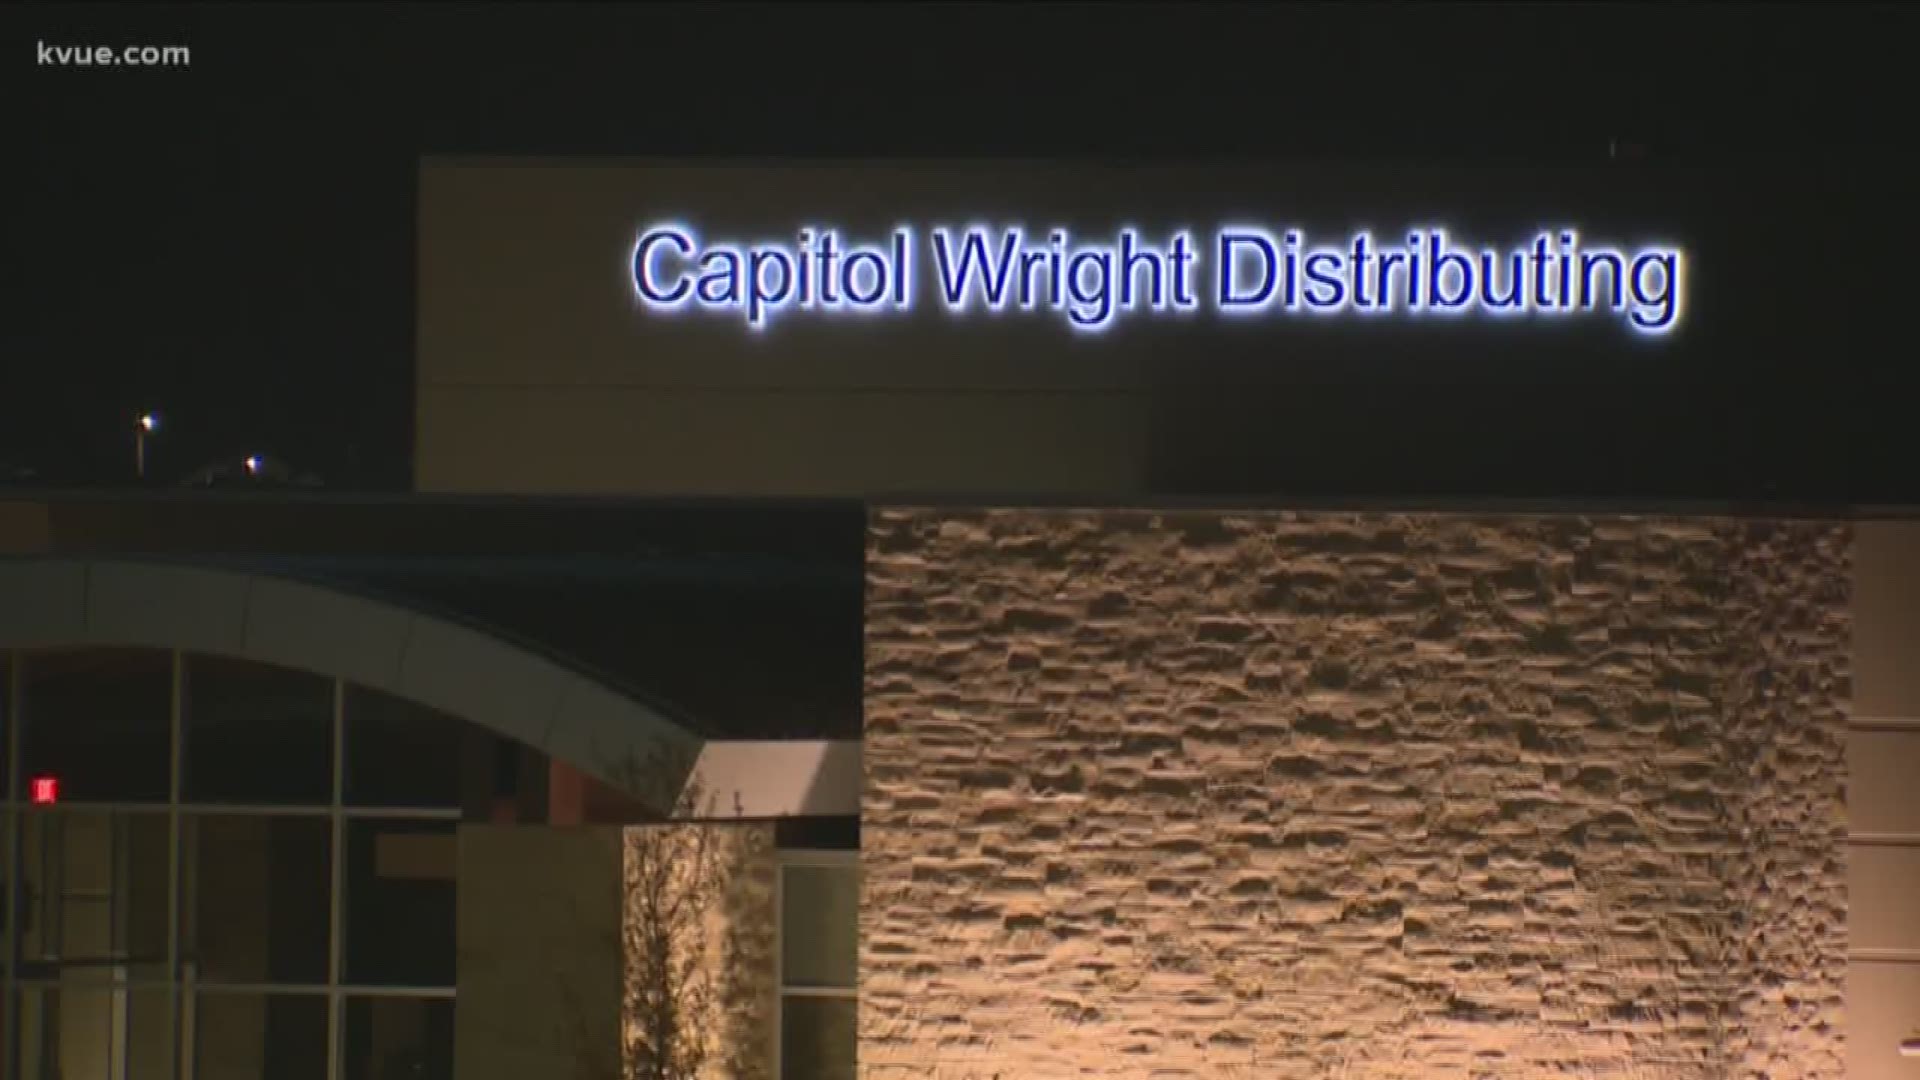 The victim was a delivery driver for Capitol Wright Distributing.